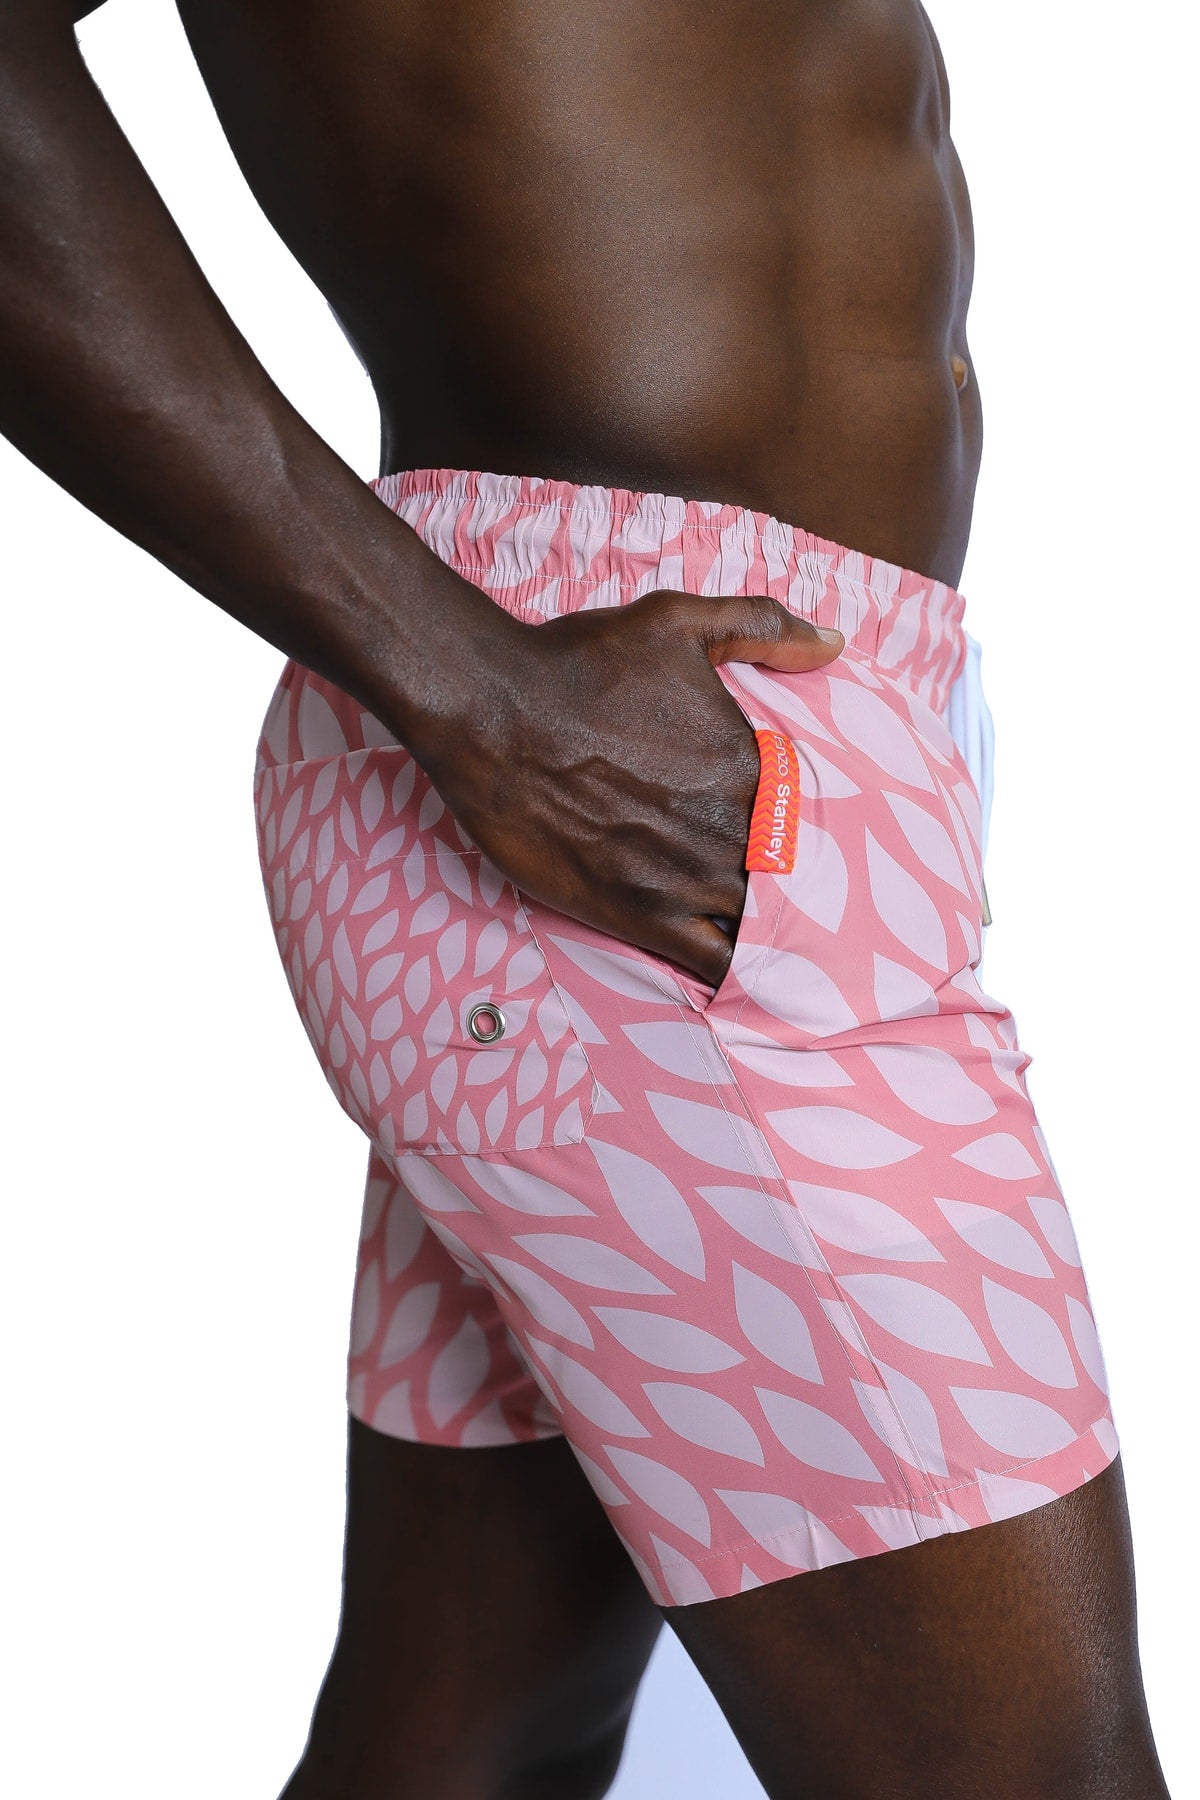 Men's Patterned Pink Beach Shorts